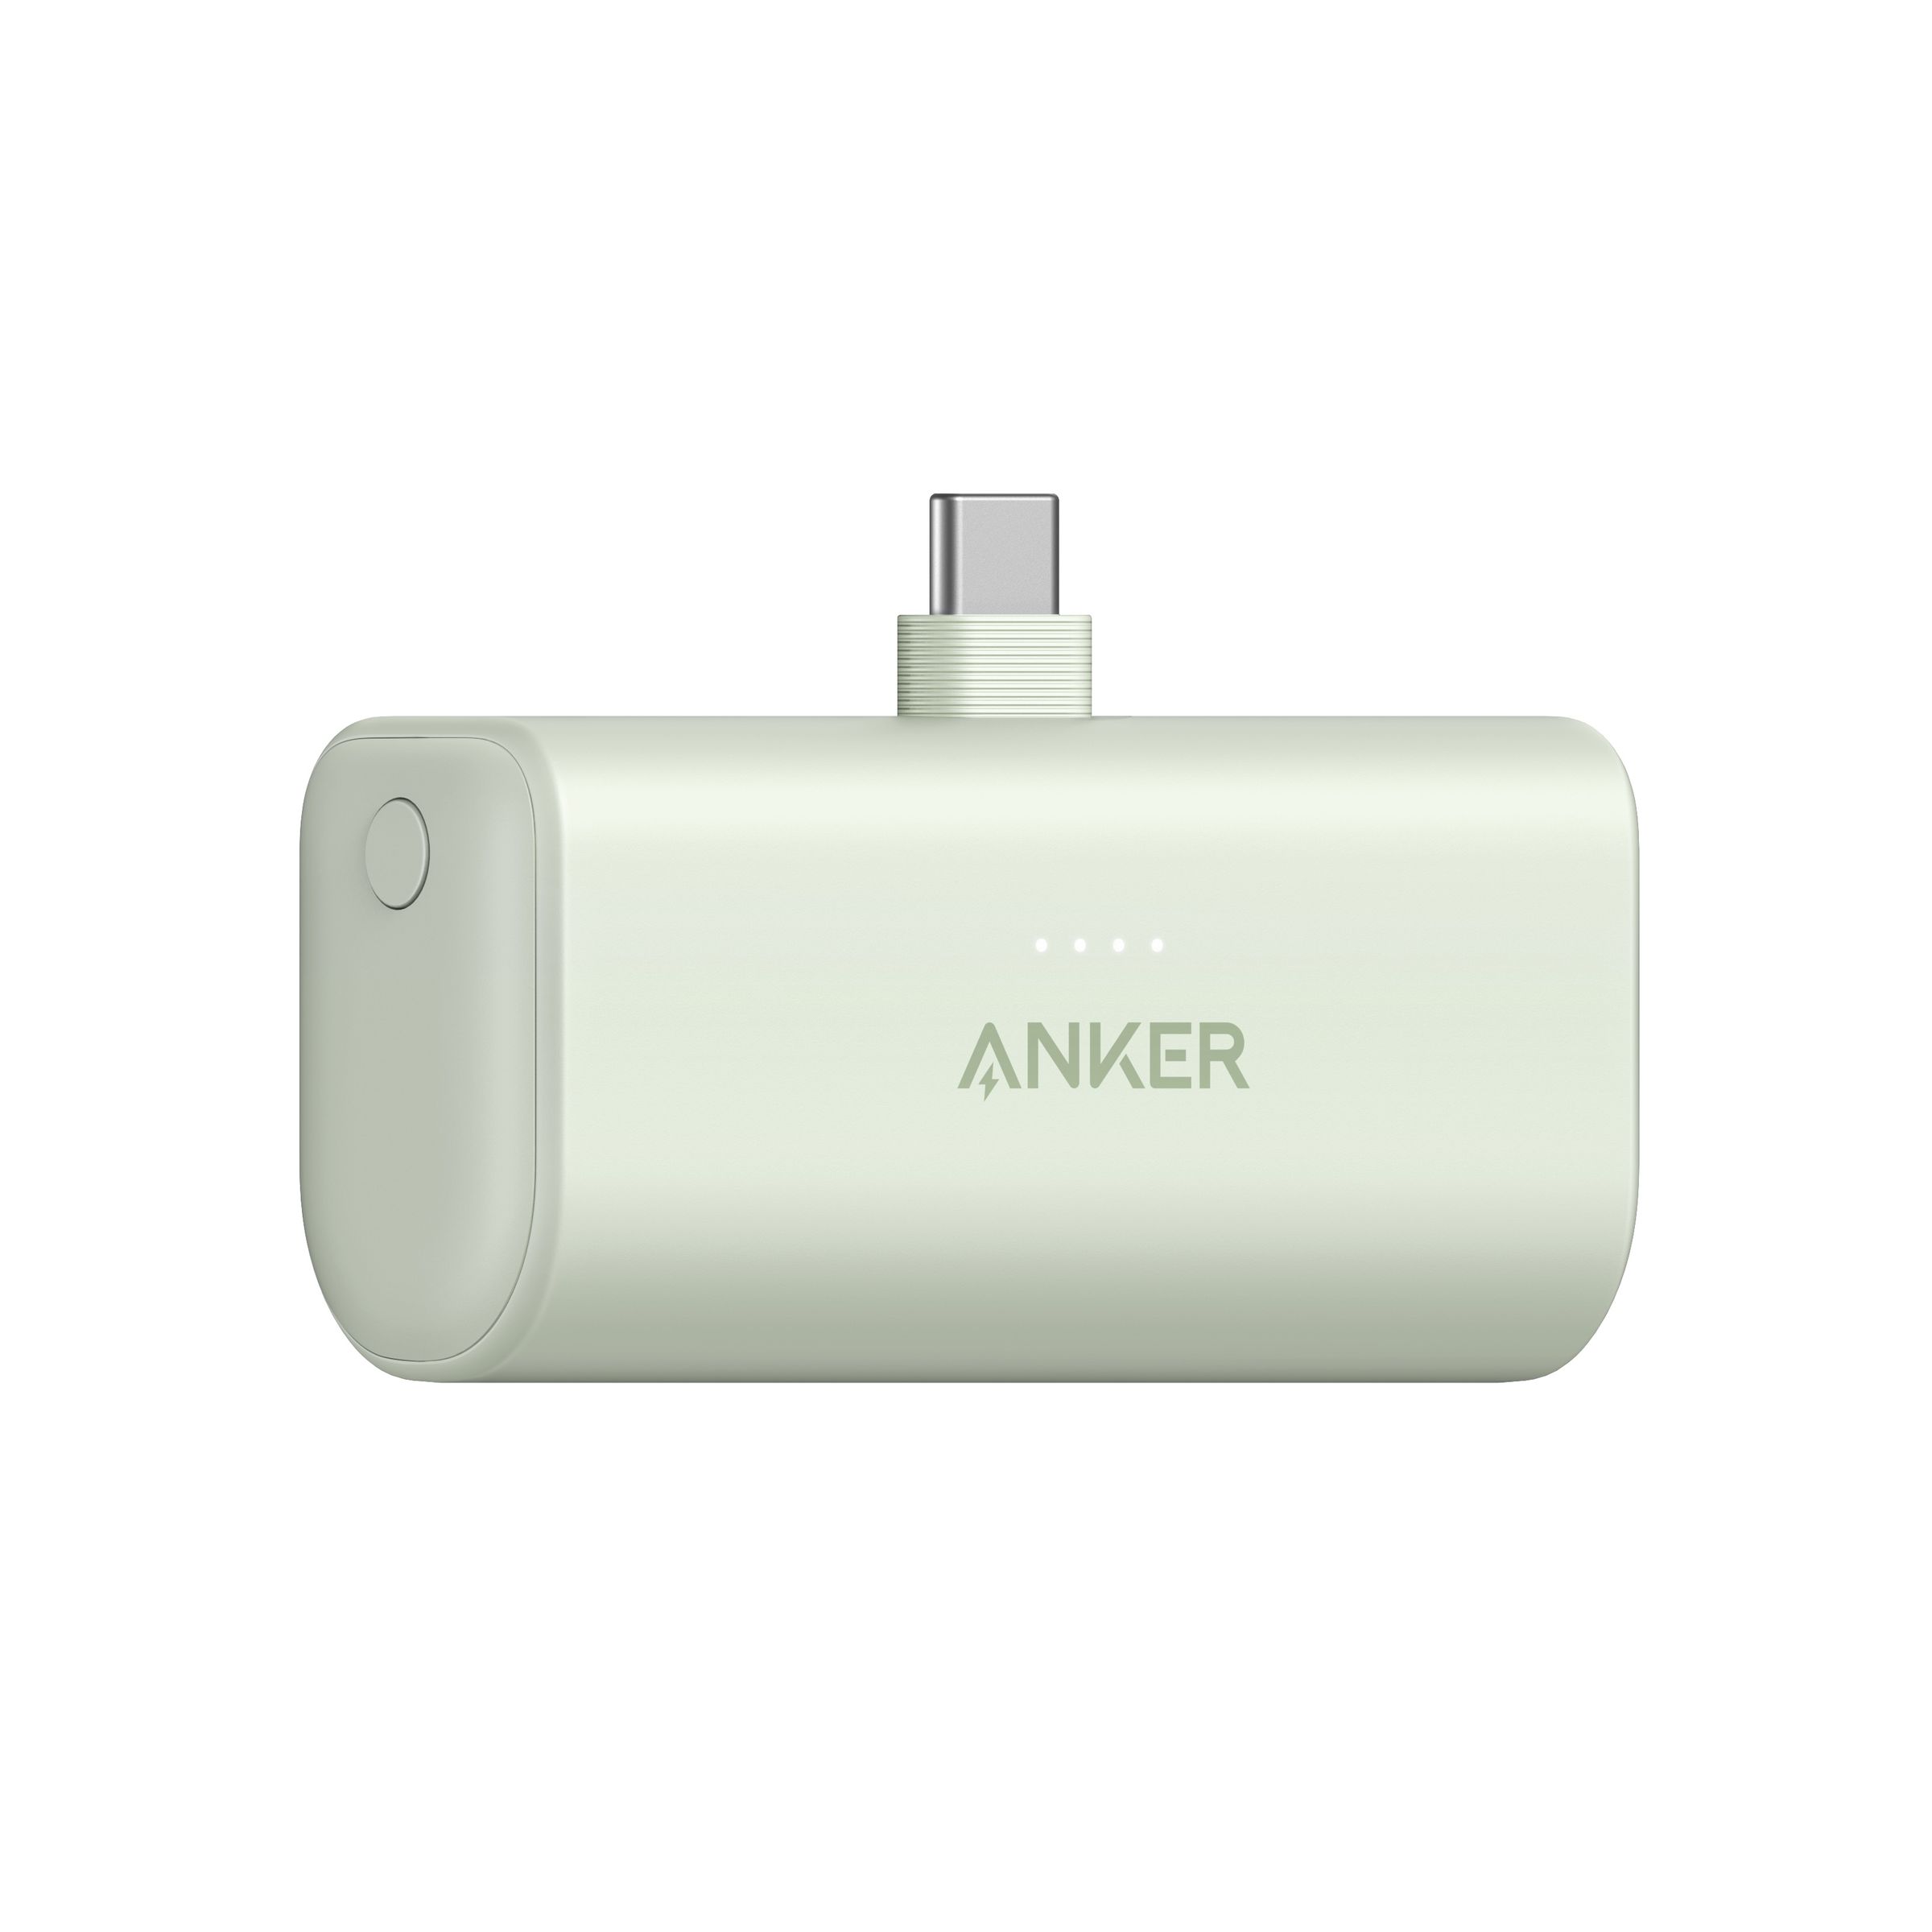 Anker Nano Power Bank (22.5W, built-in USB-C Connector)